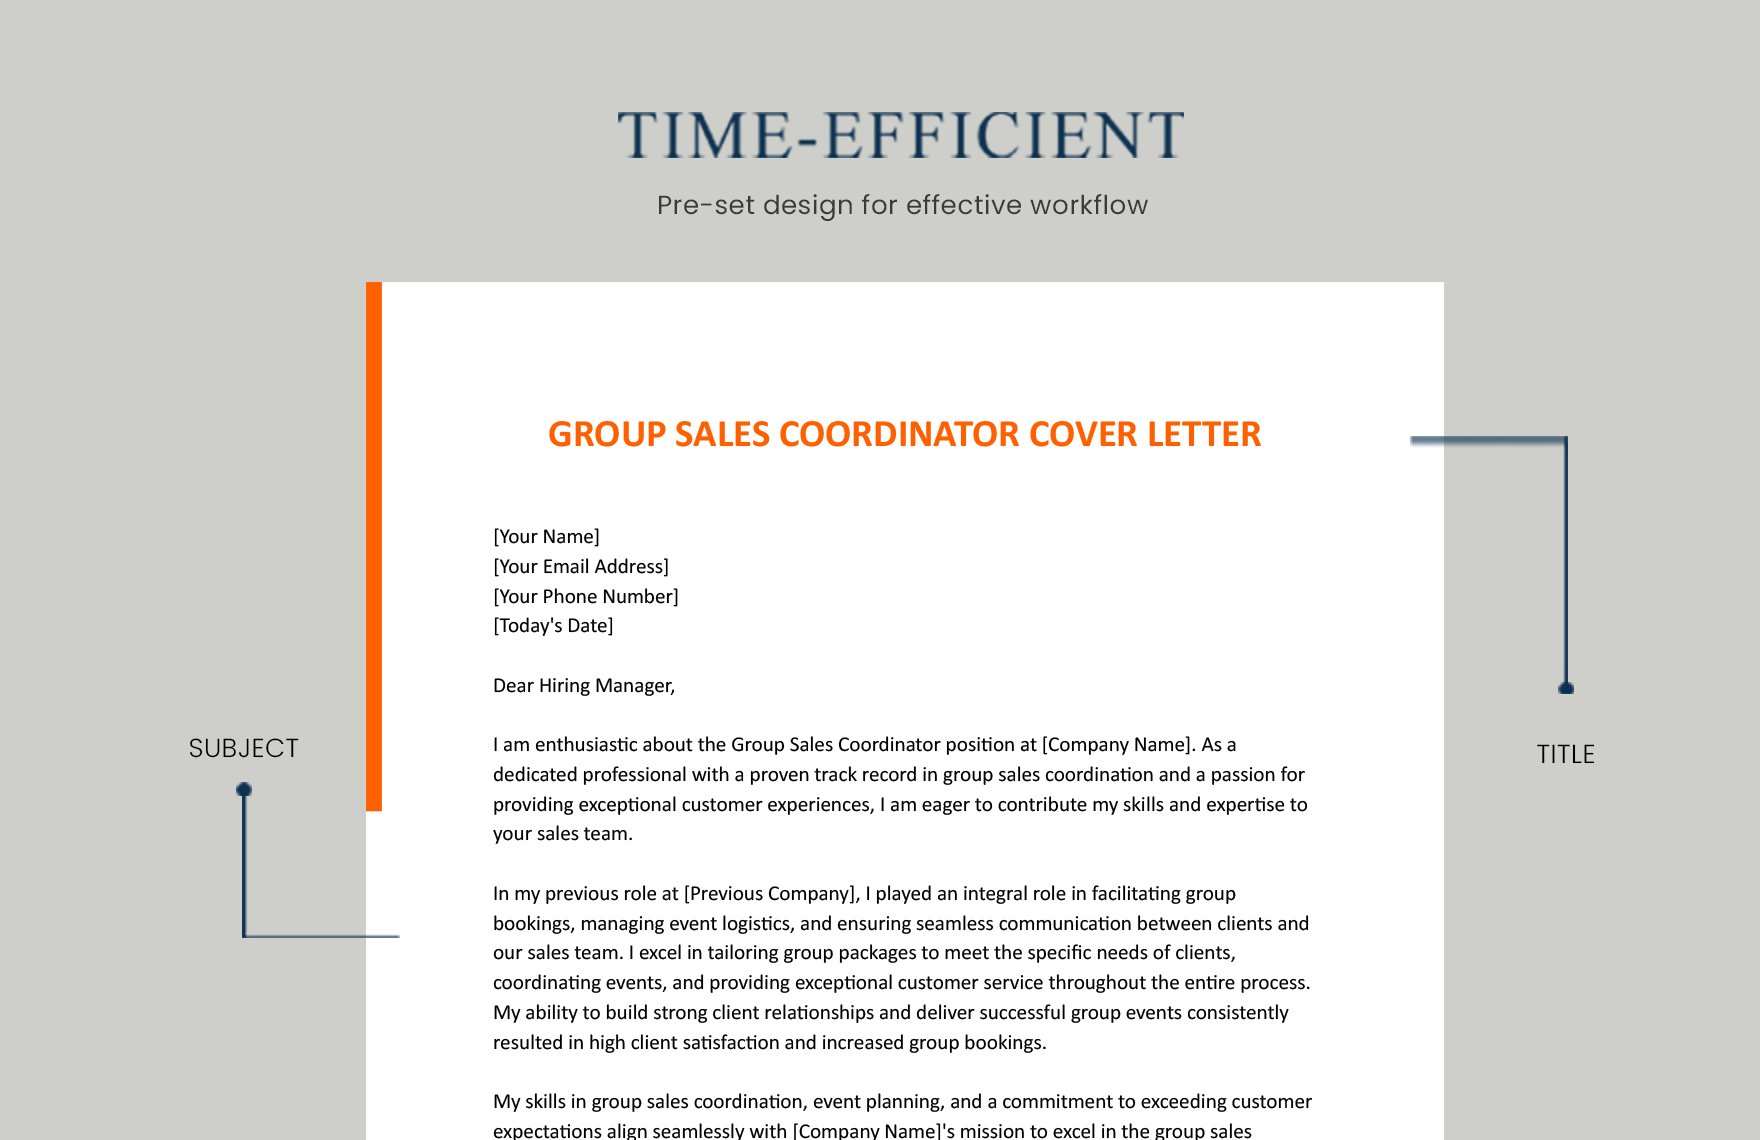 Group Sales Coordinator Cover Letter